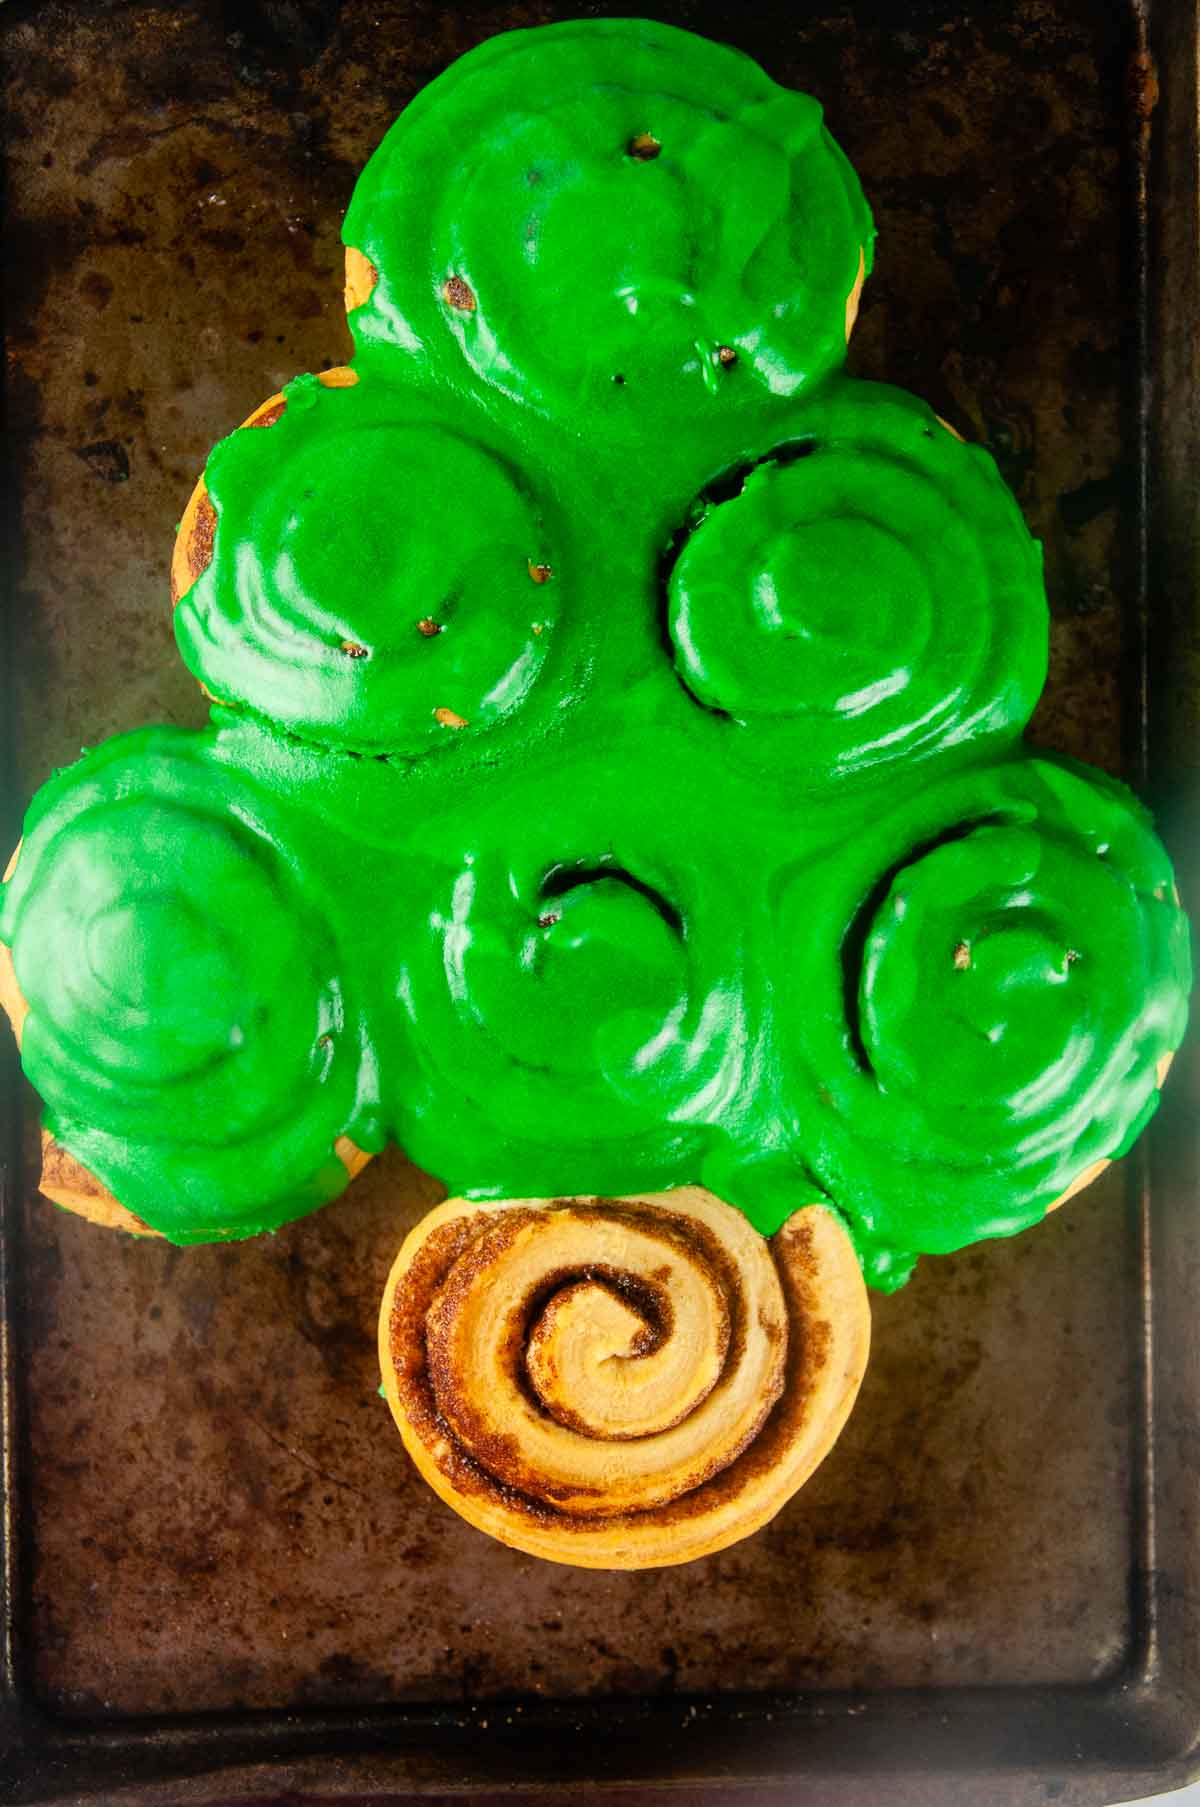 The cinnamon roll Christmas tree covered in green frosting ready for decorating!